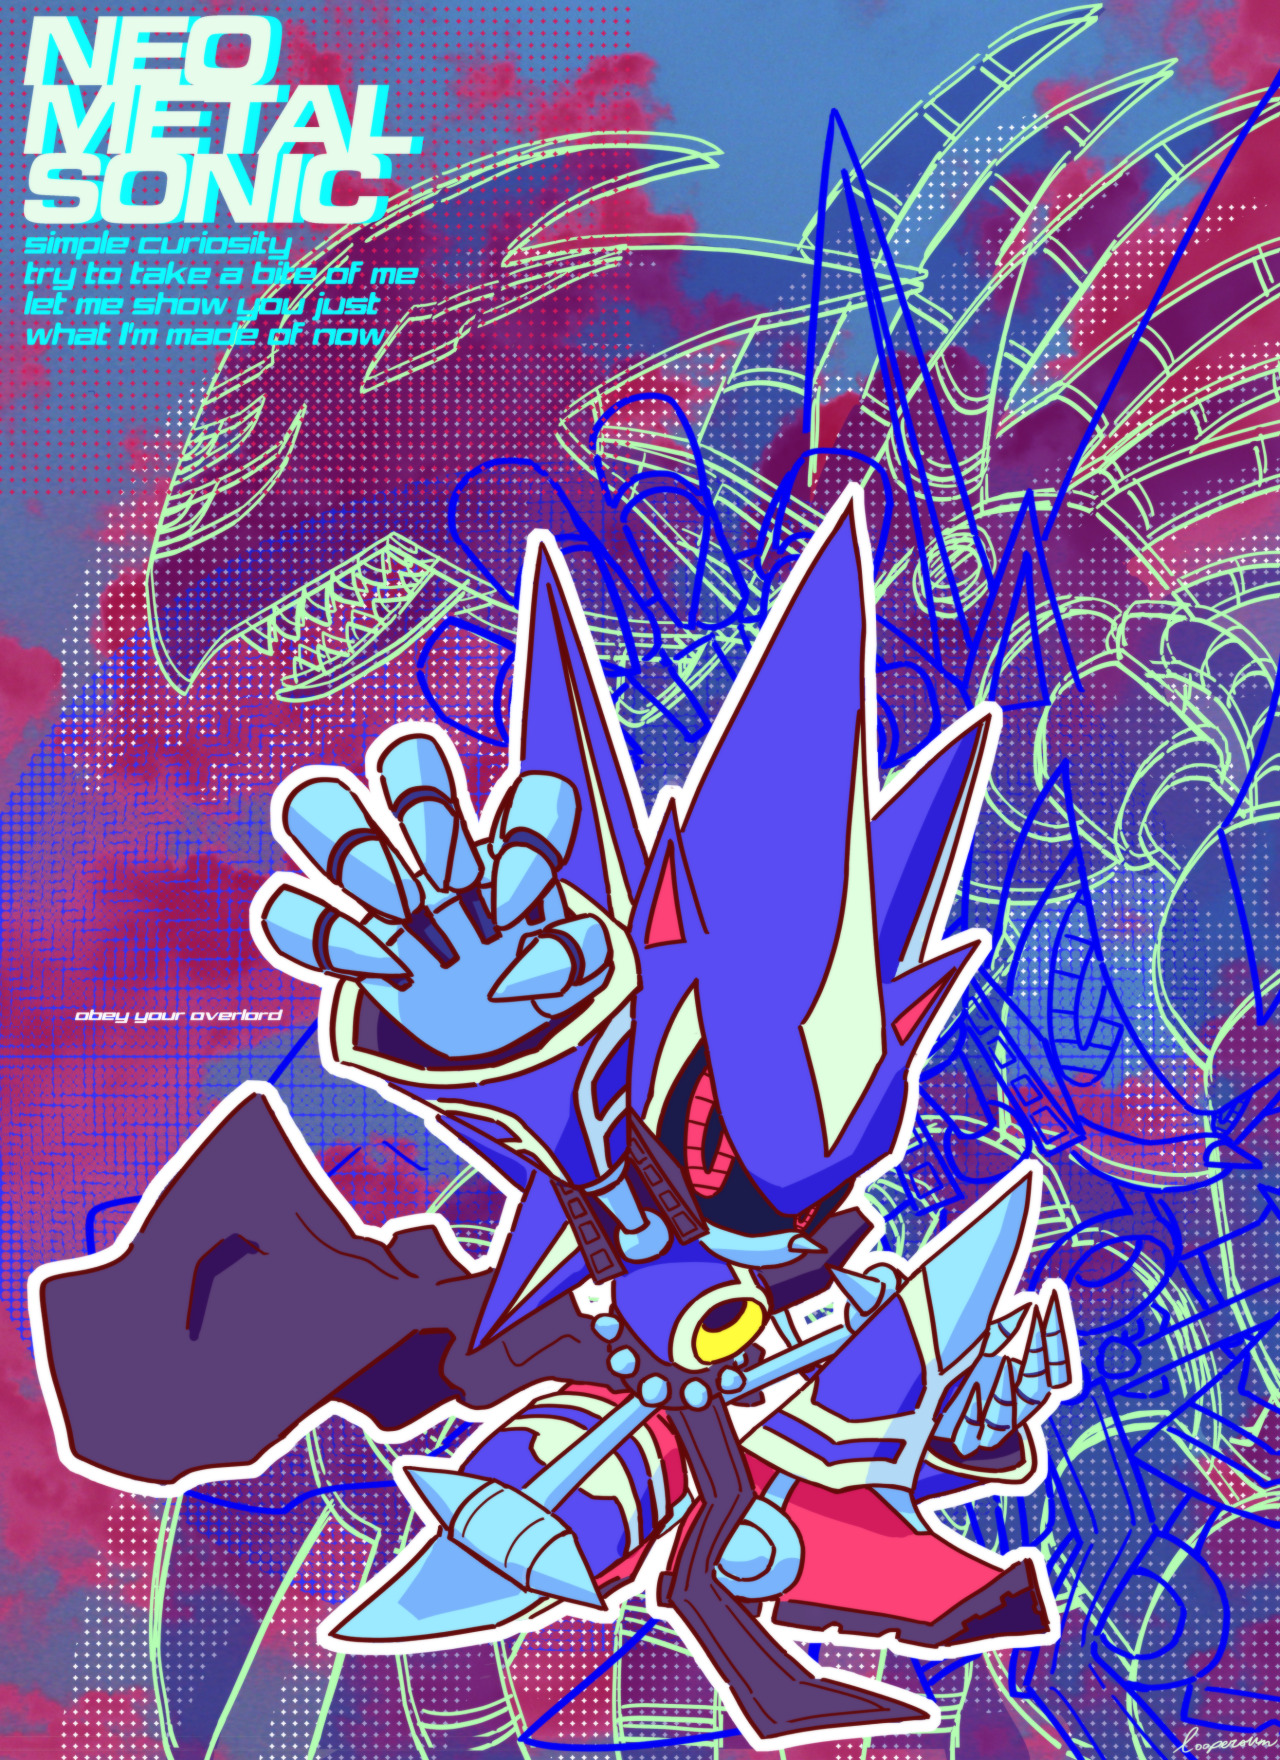 introducing our neo metal sonic va: Noz! edited by Noz as well